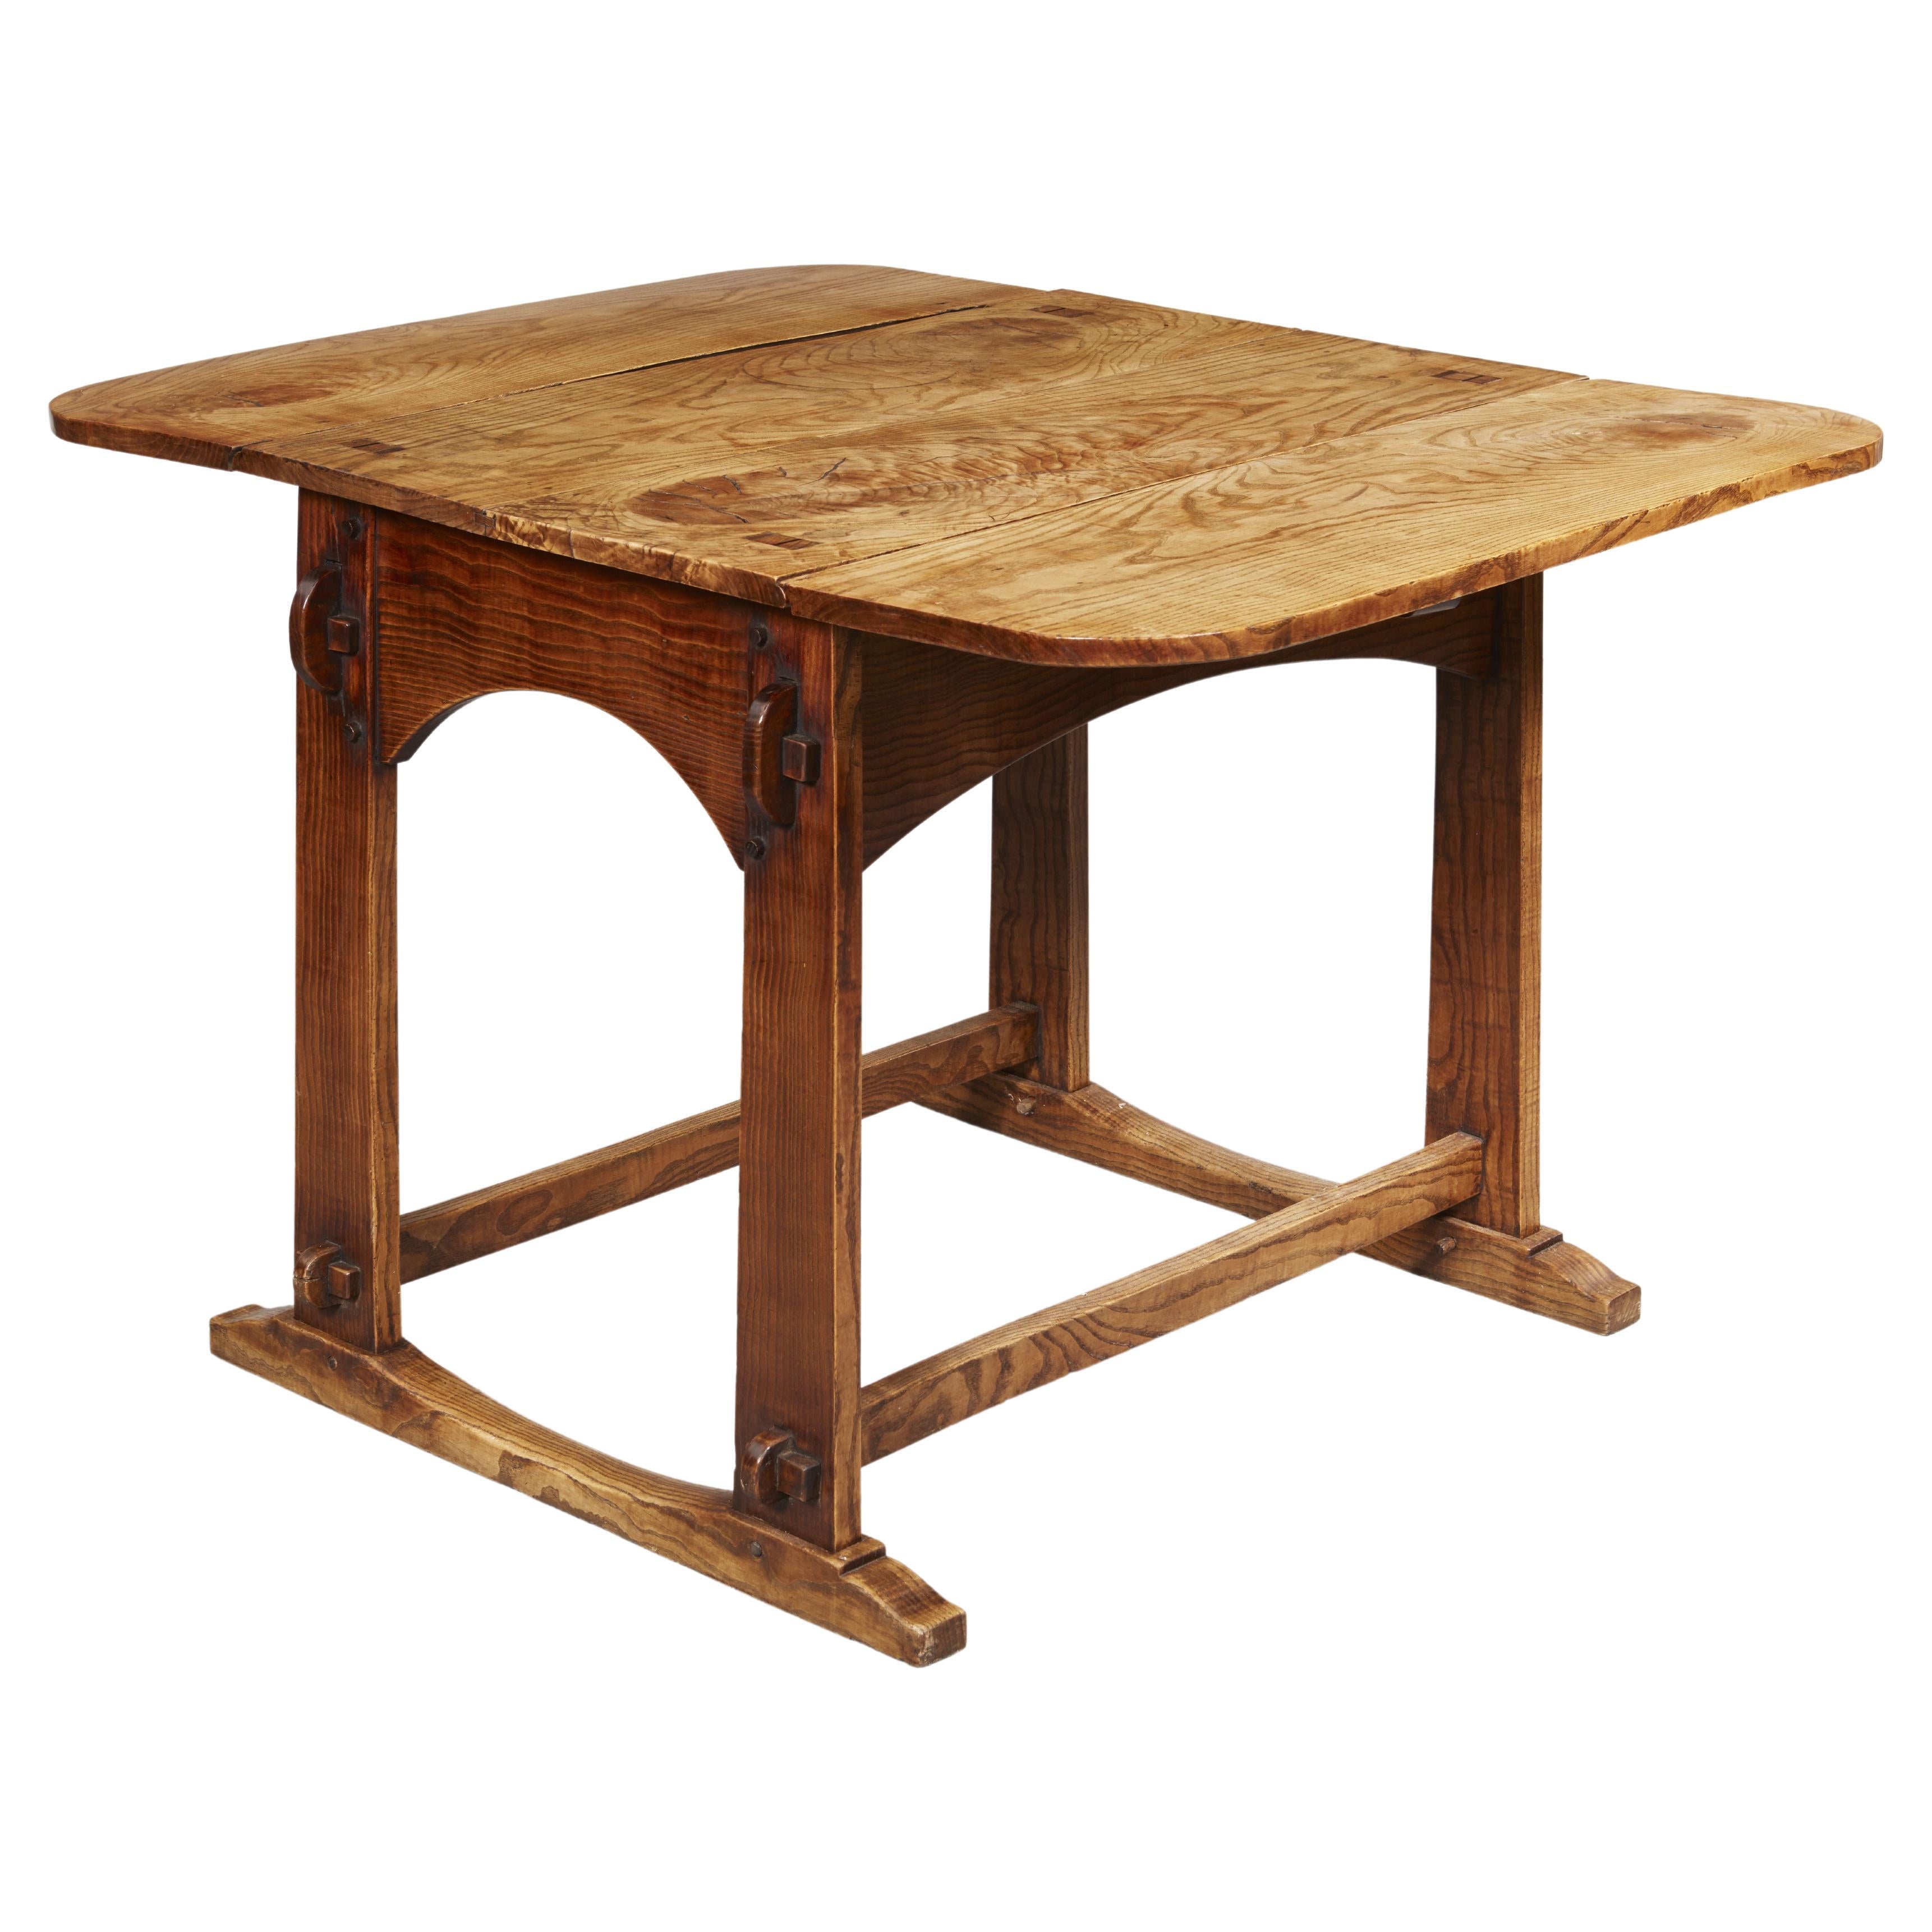 English Vernacular Field Ash Center Table For Sale